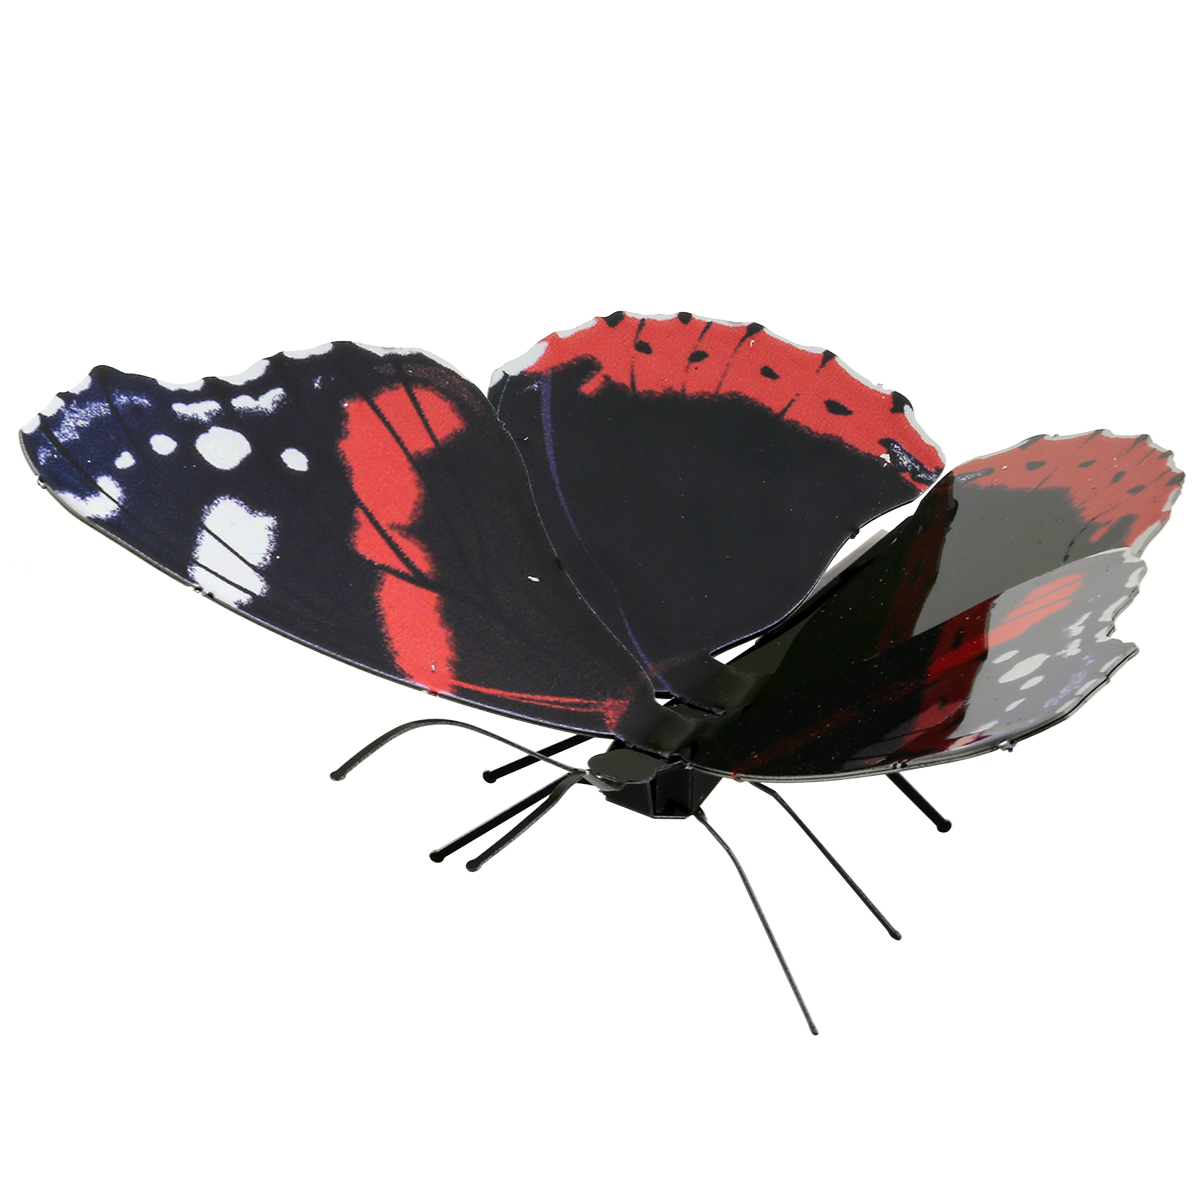 Metal Earth bugs - Red Admiral